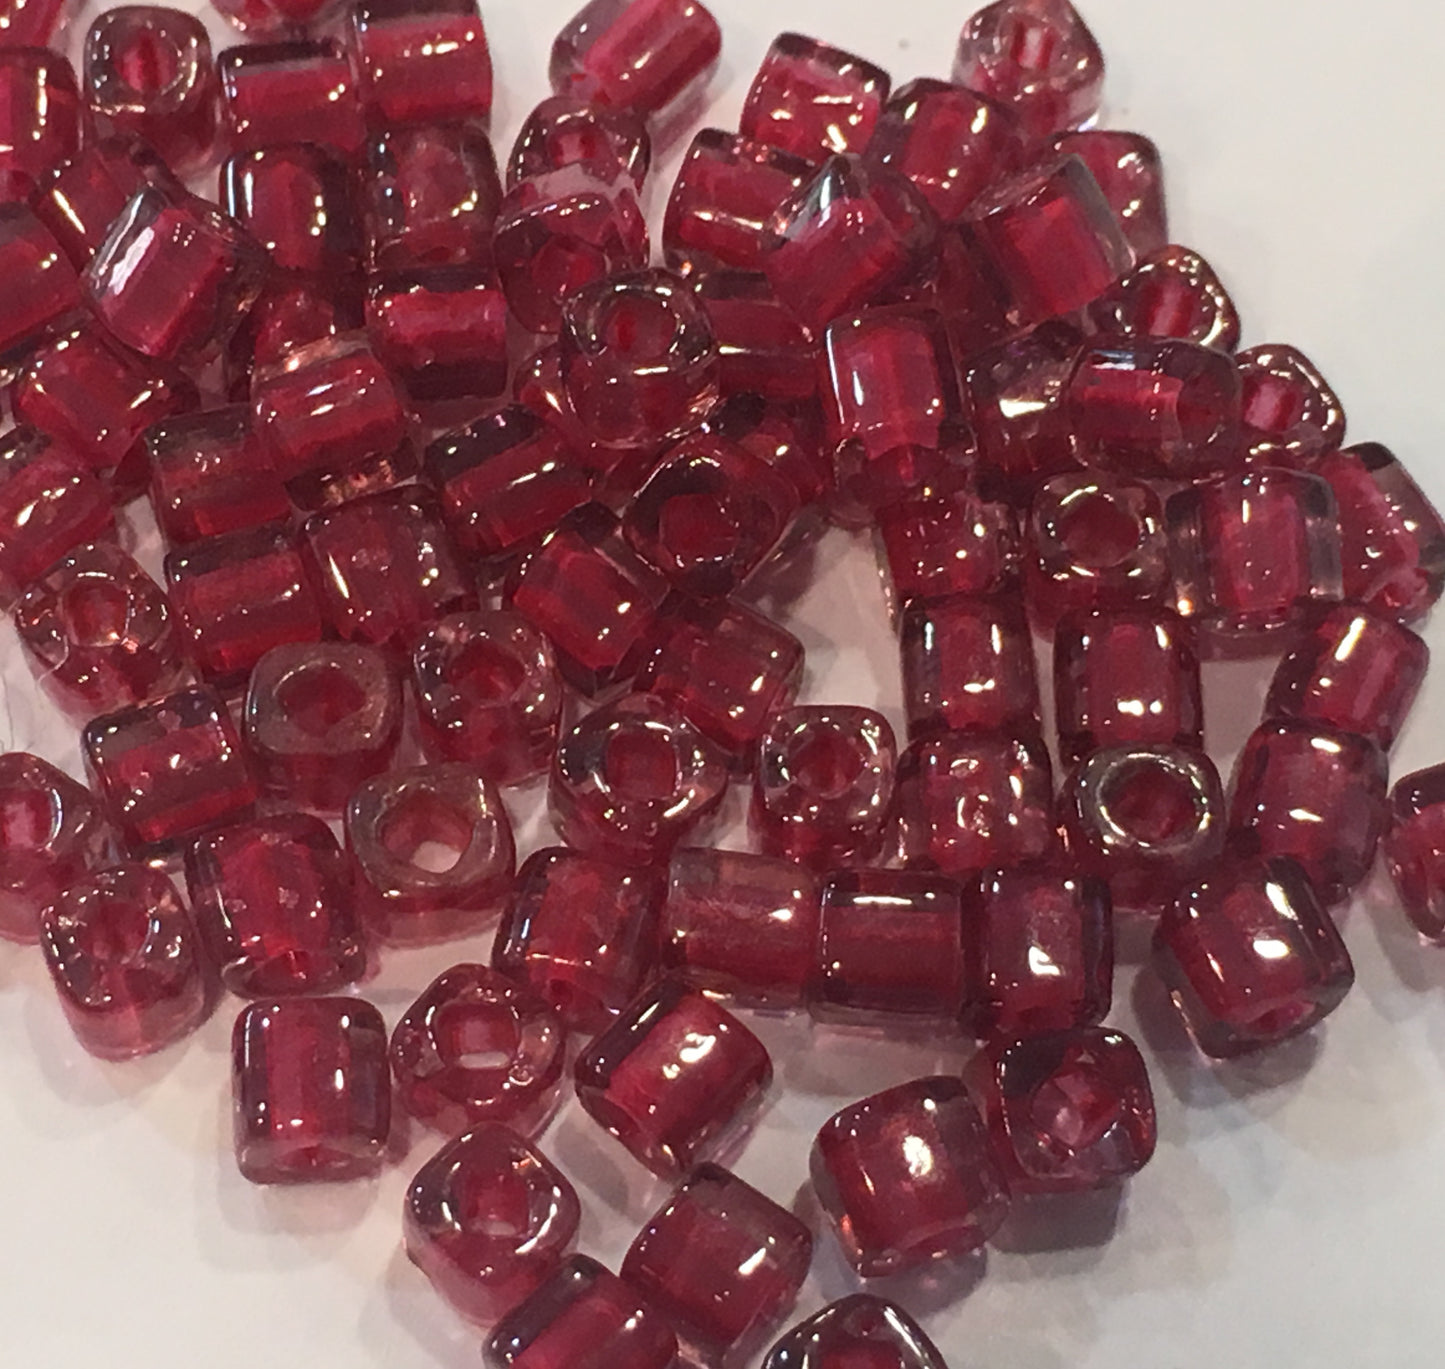 TOHO T4C291  4 mm Translustered Raspberry Lined Crystal Cube / Square  Beads, 5 gm